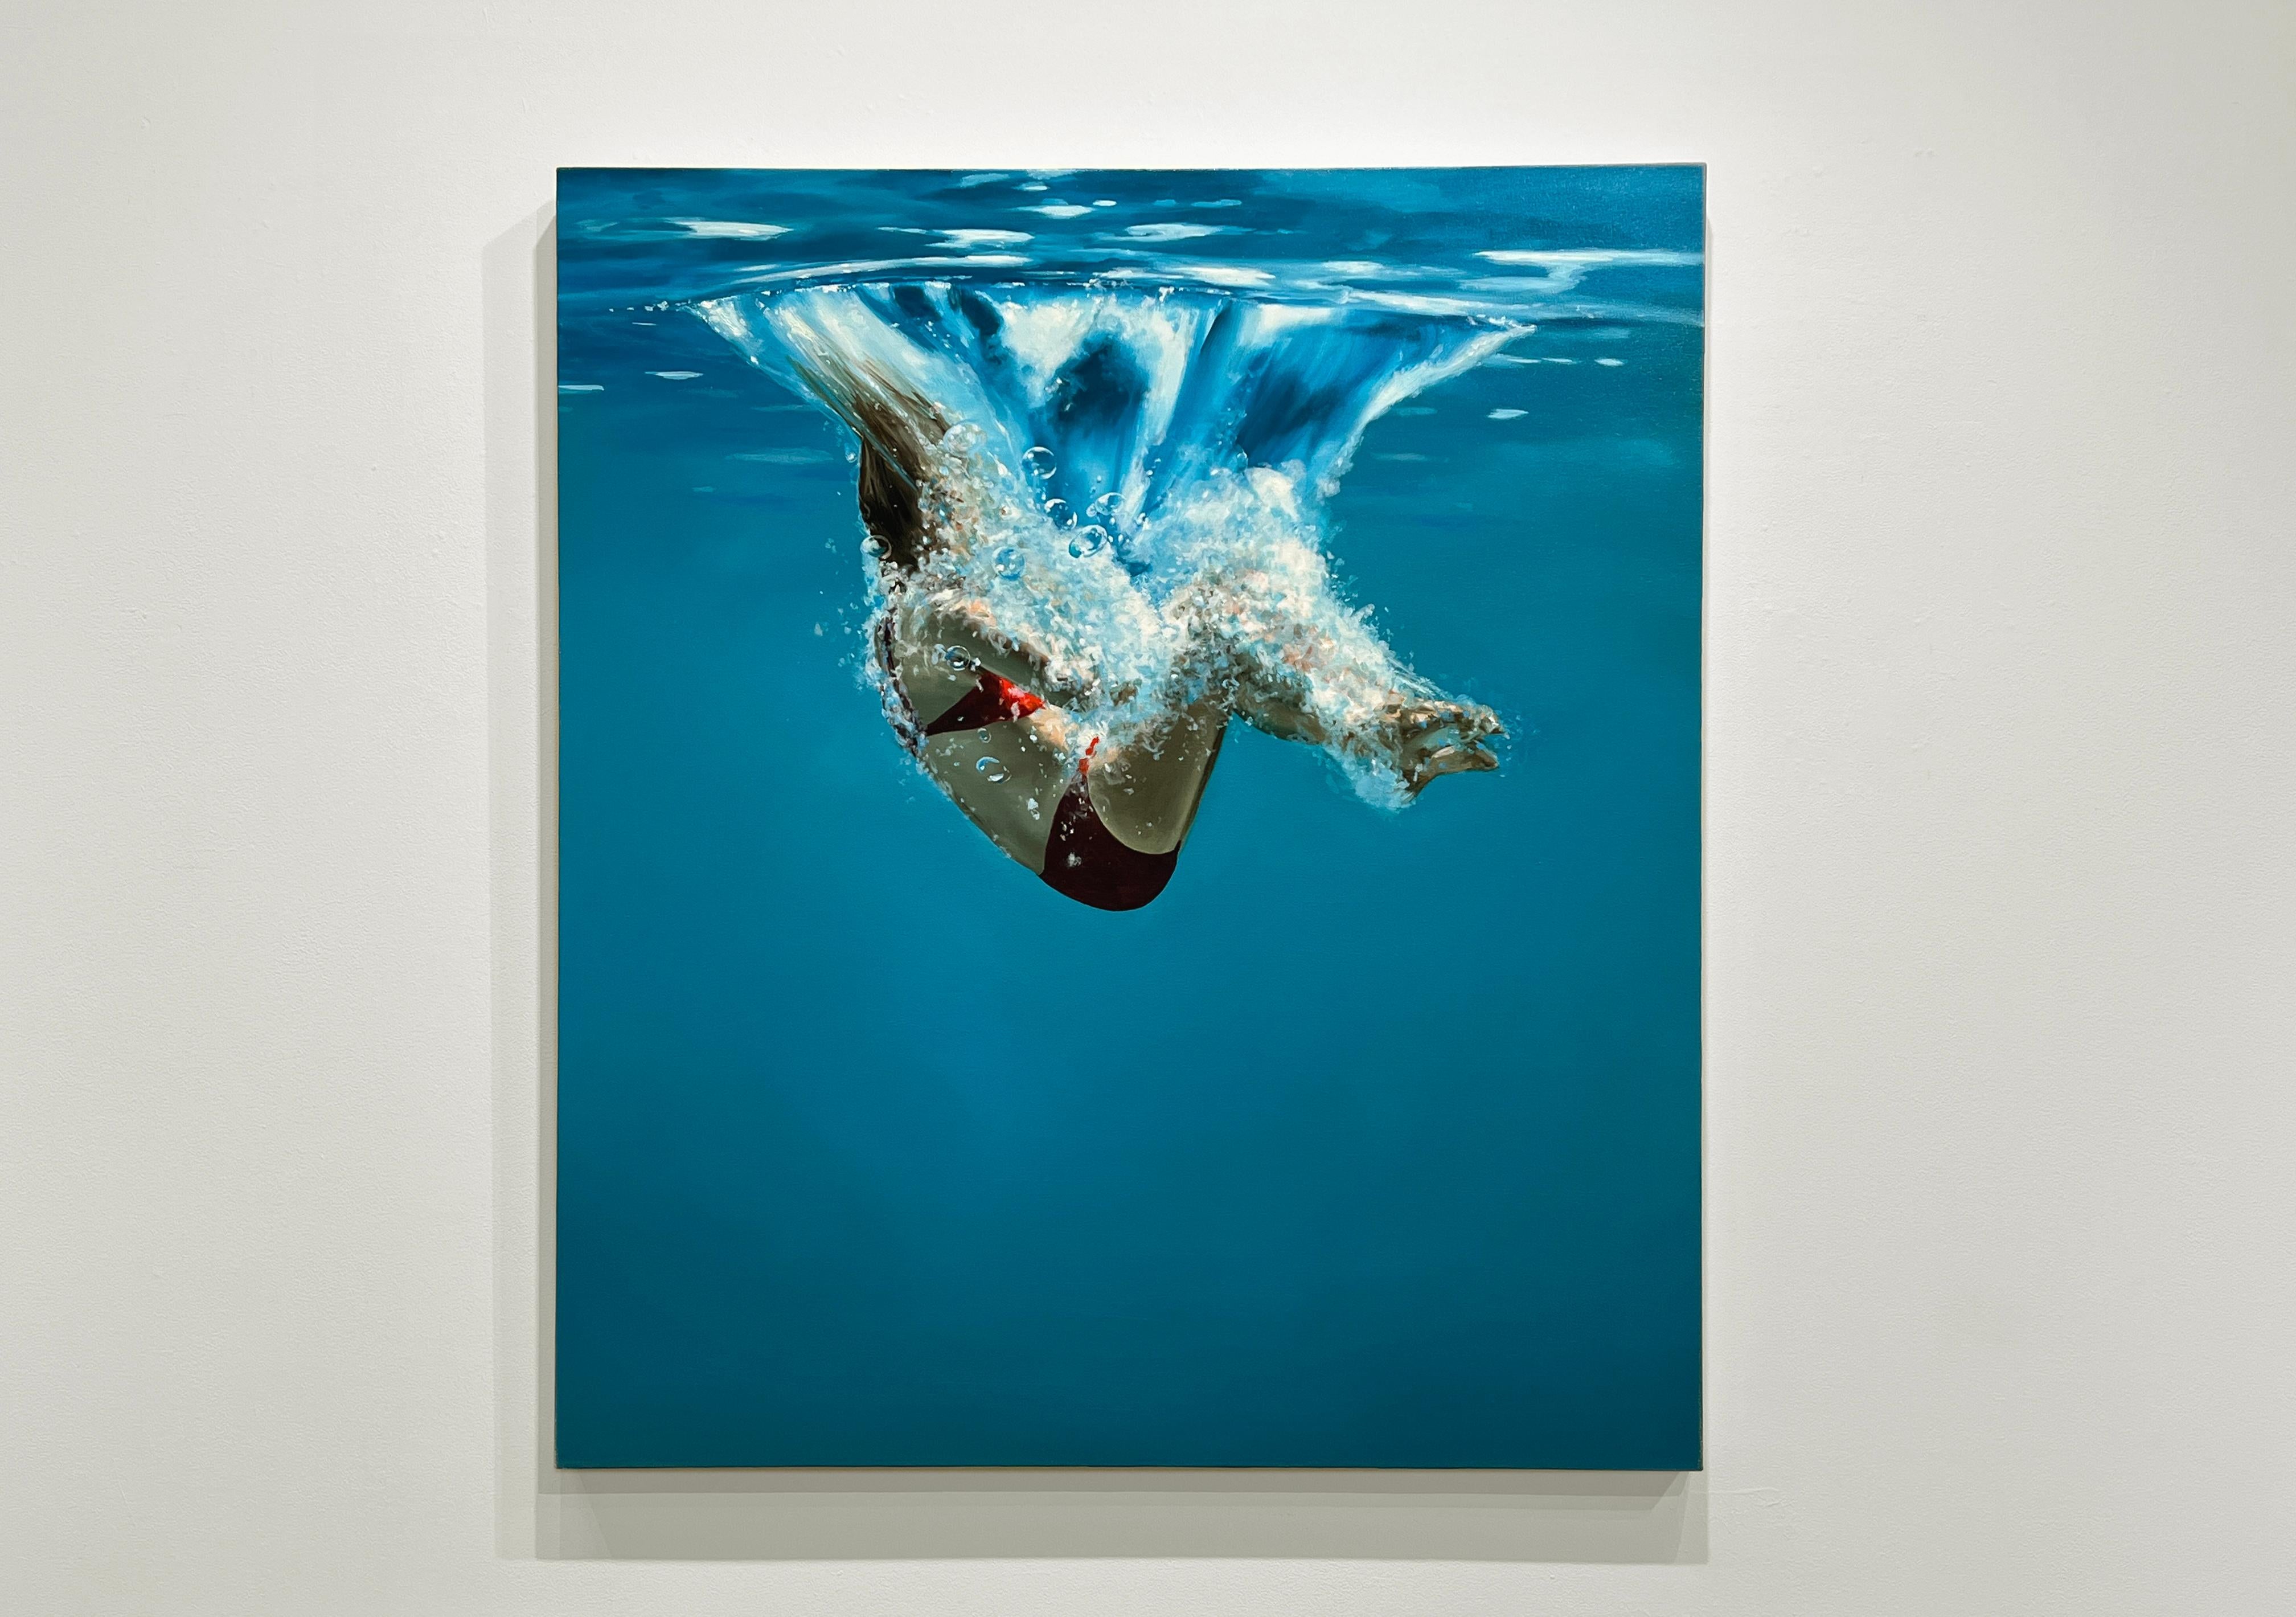 ENVELOP - Contemporary Figurative Realism / Swimmer / Diver / Water - Painting by Eric Zener